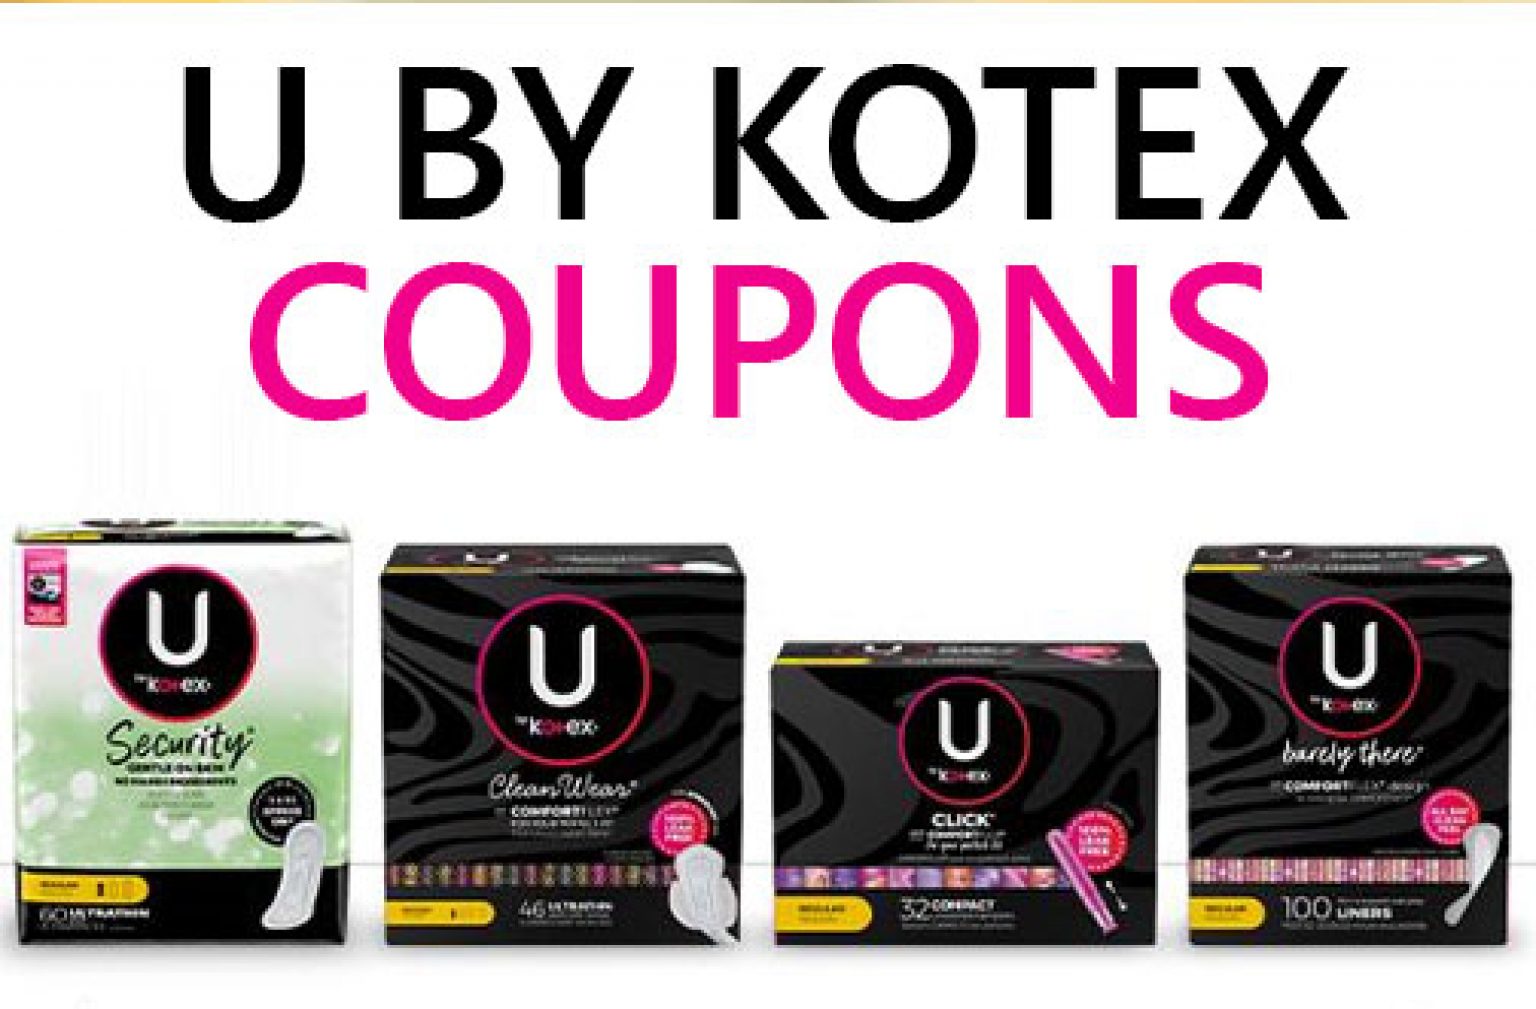 U by Kotex Product Coupons Save up to 12 — Deals from SaveaLoonie!